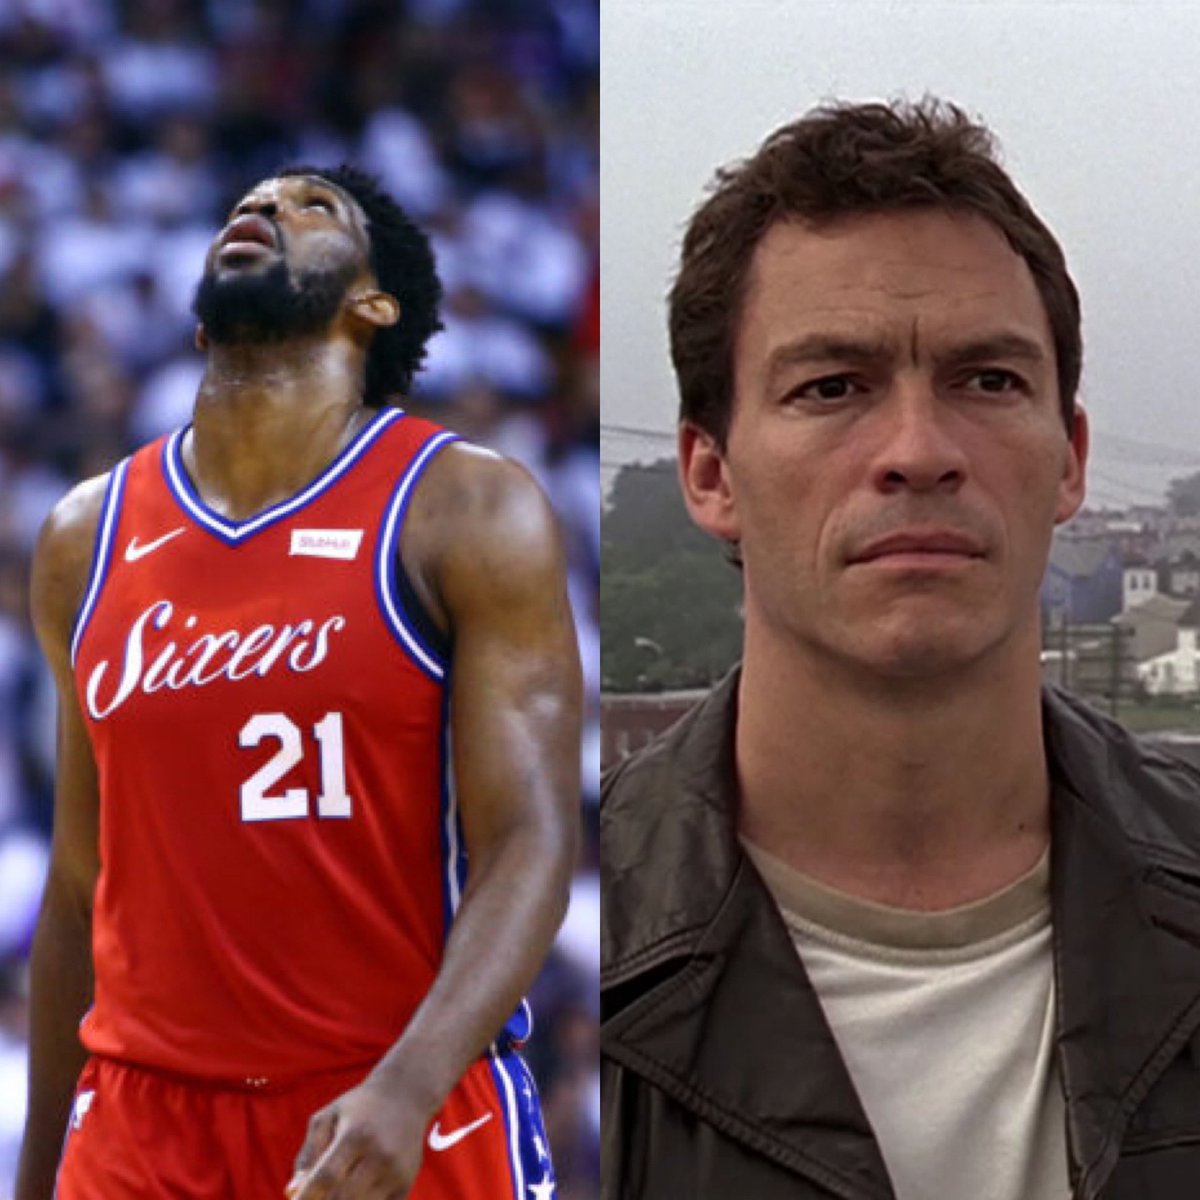 Mcnulty is Joel Embiid. Mcnulty was a good cop but he was a dysfunctional drunk. Embiid a great player but he half ass on some nights.